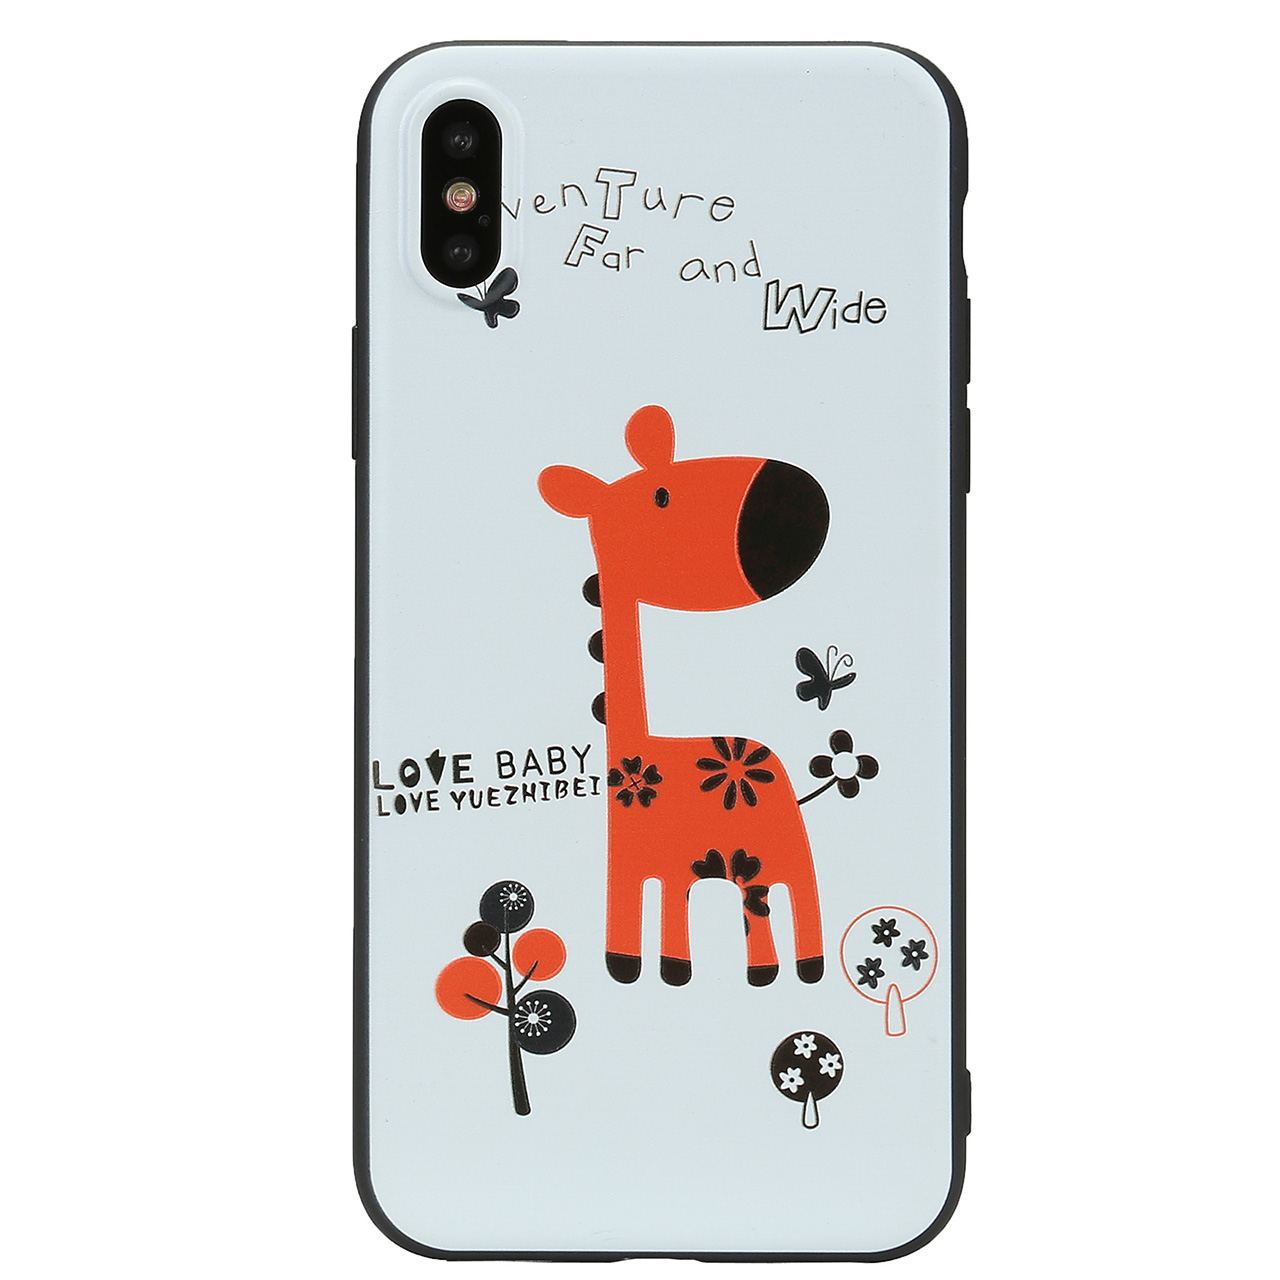 ACBungji iPhone X case Embossment Print Lightweight Soft Flexible TPU Protective Cover Case for iPhone X -Giraffe